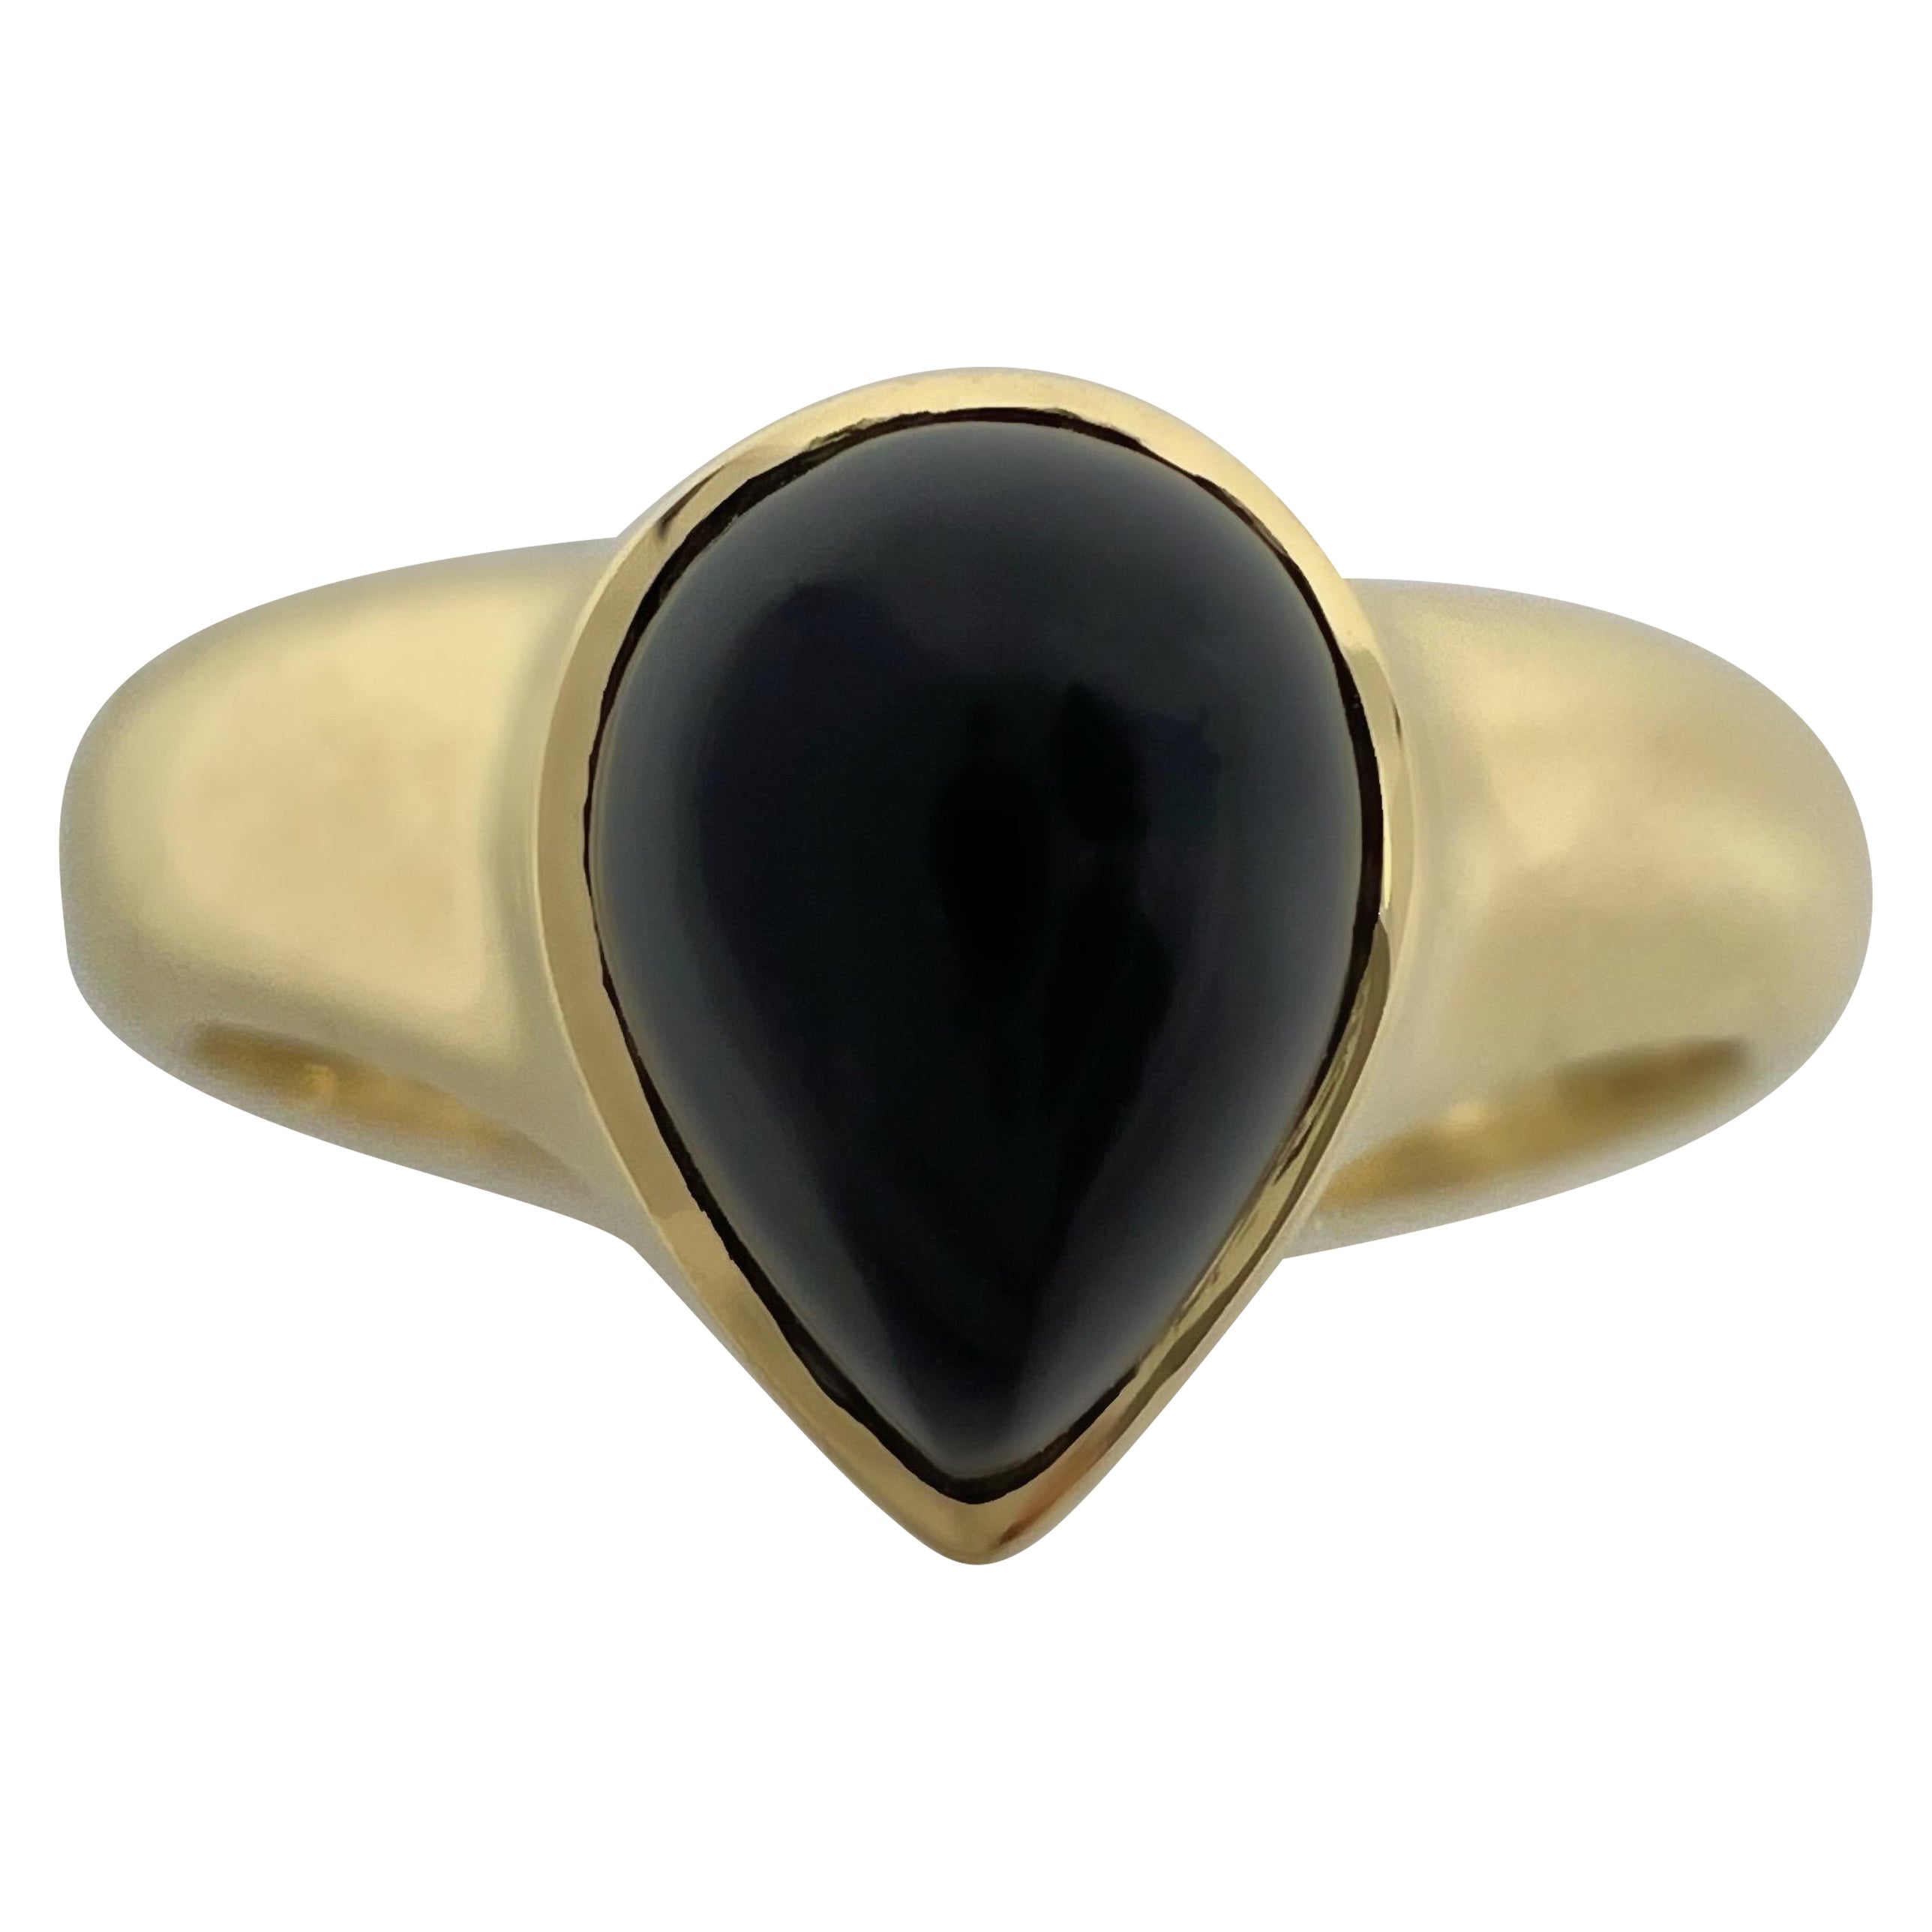 Rare Vintage Van Cleef & Arpels Black Onyx Pear Cabochon 18k Yellow Gold Ring For Sale